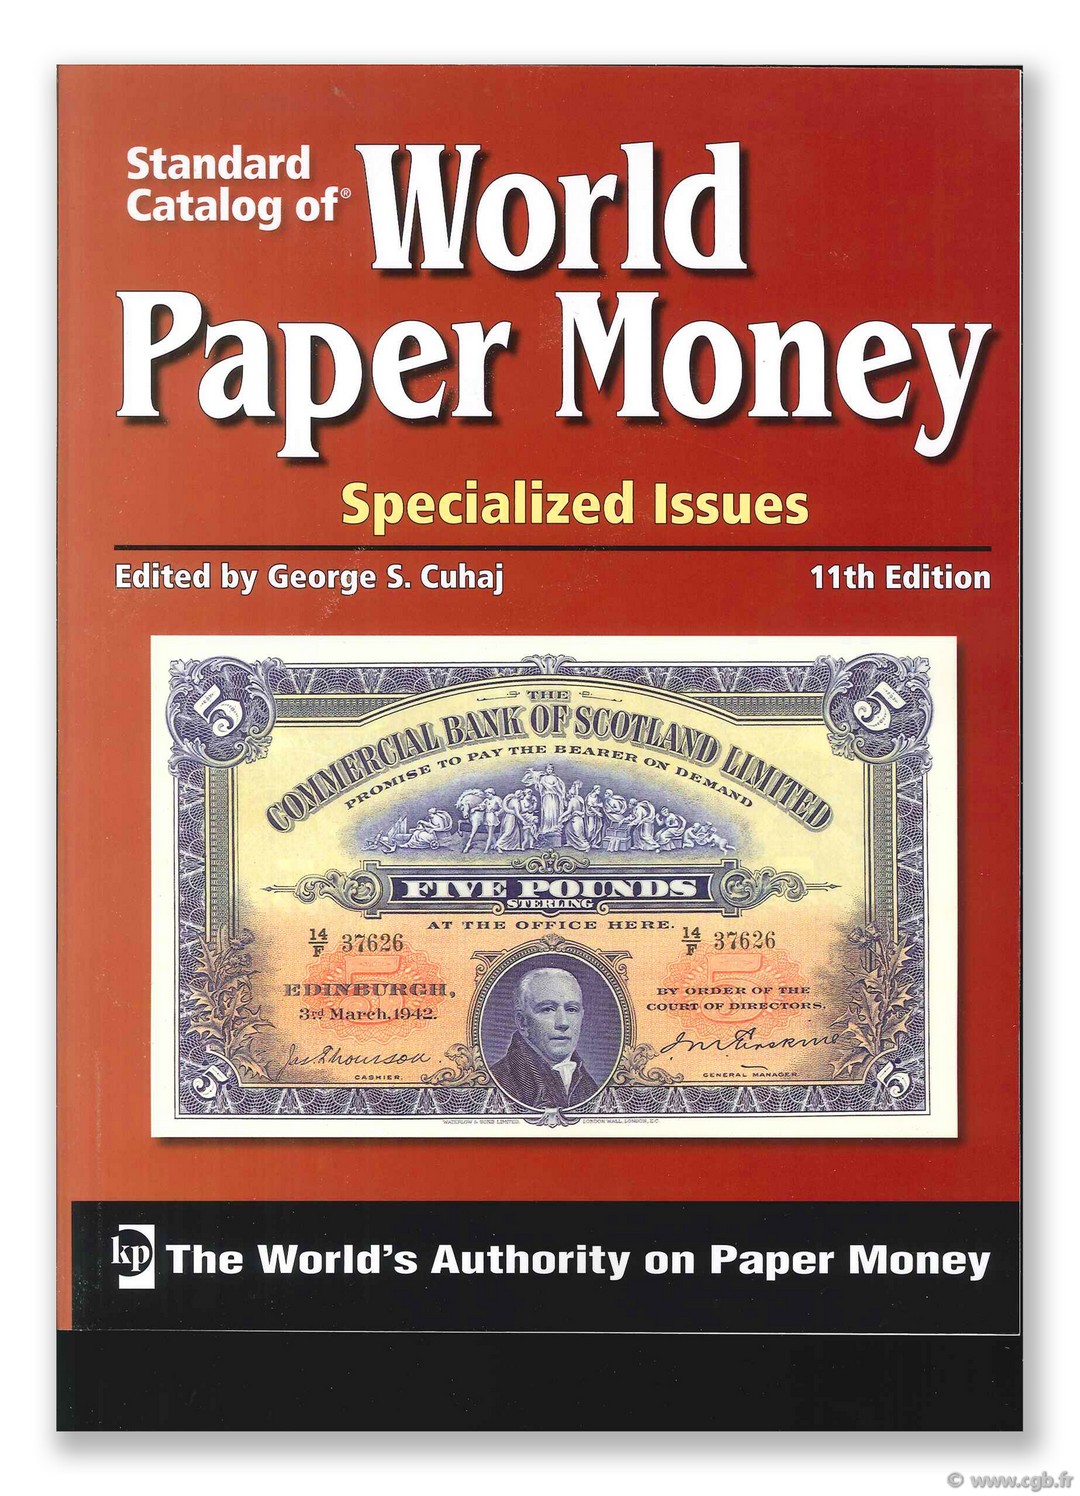 World paper money Vol.I specialized issues, 11th edition PICK Albert